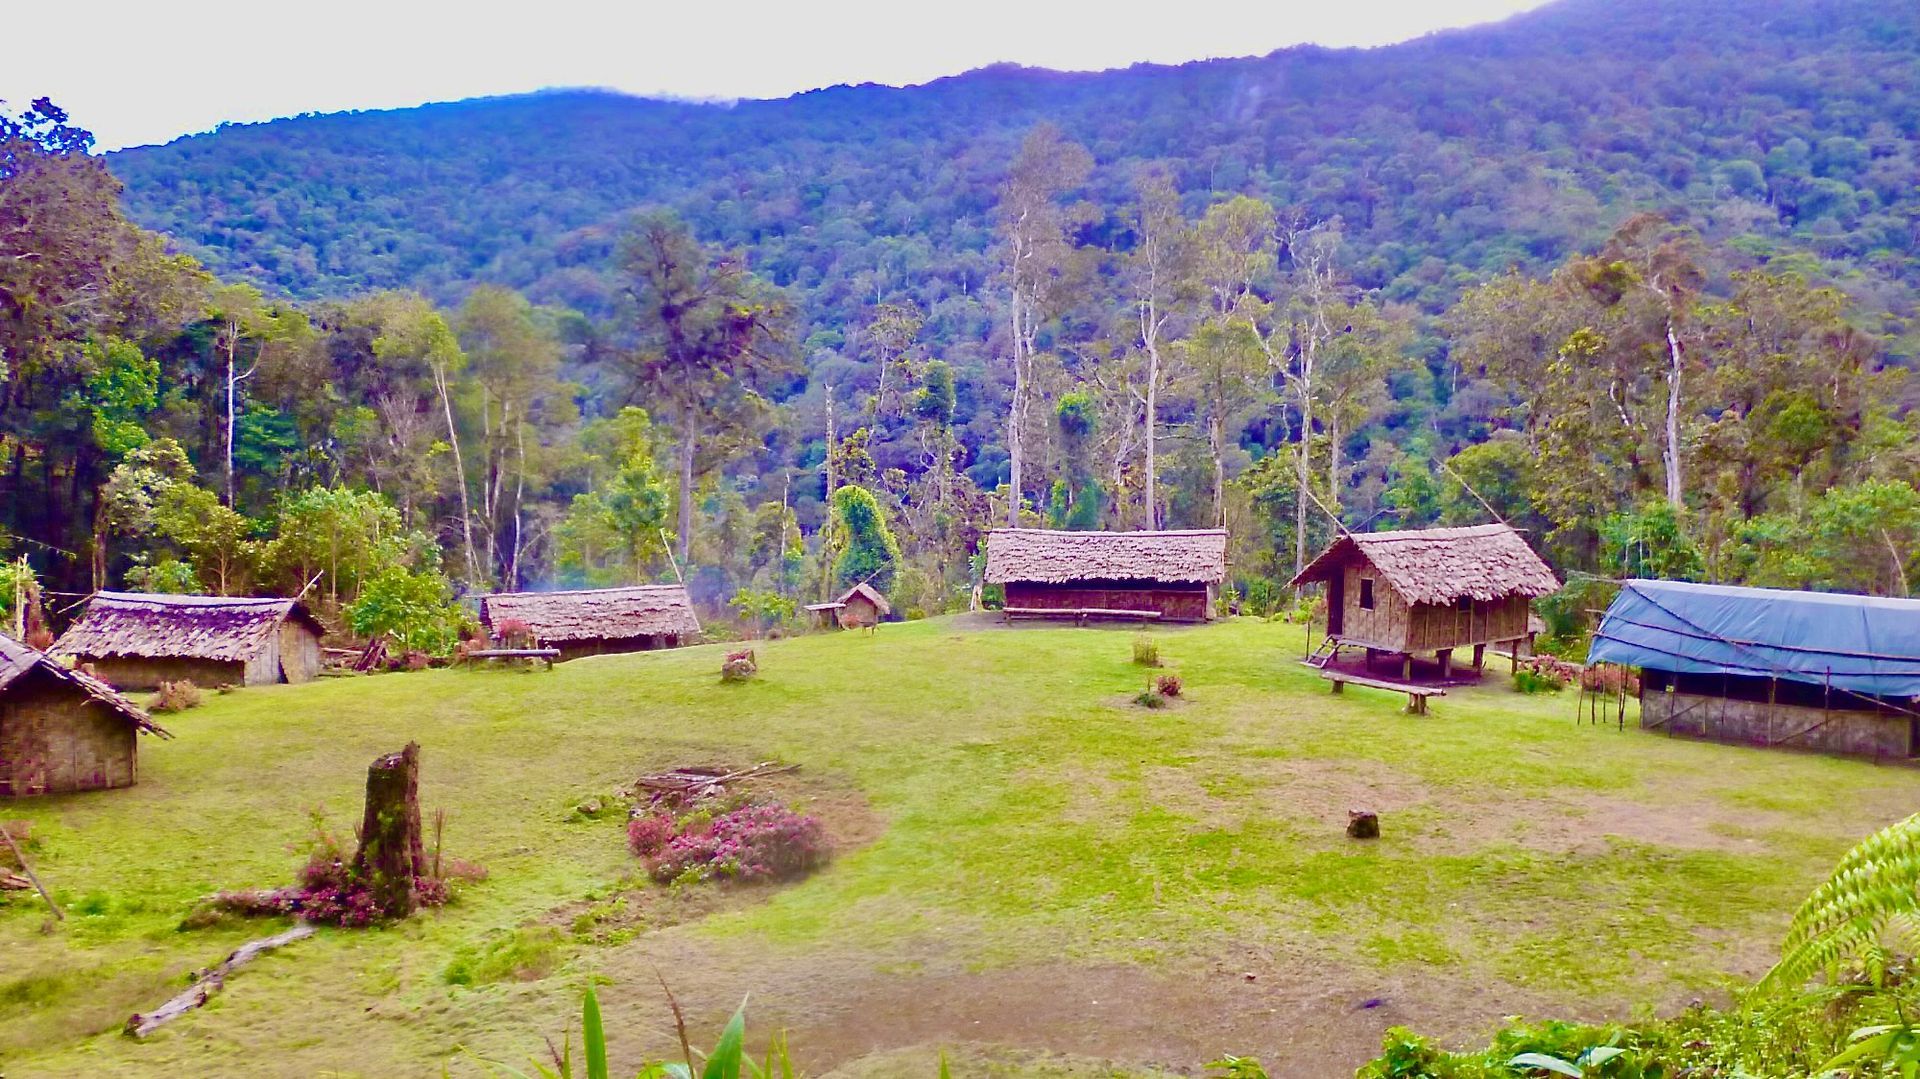 Image depicts a lush green plateau with 6 guest houses made out of local time and thatched roofing. The campsite is called Templeton's Crossing. 